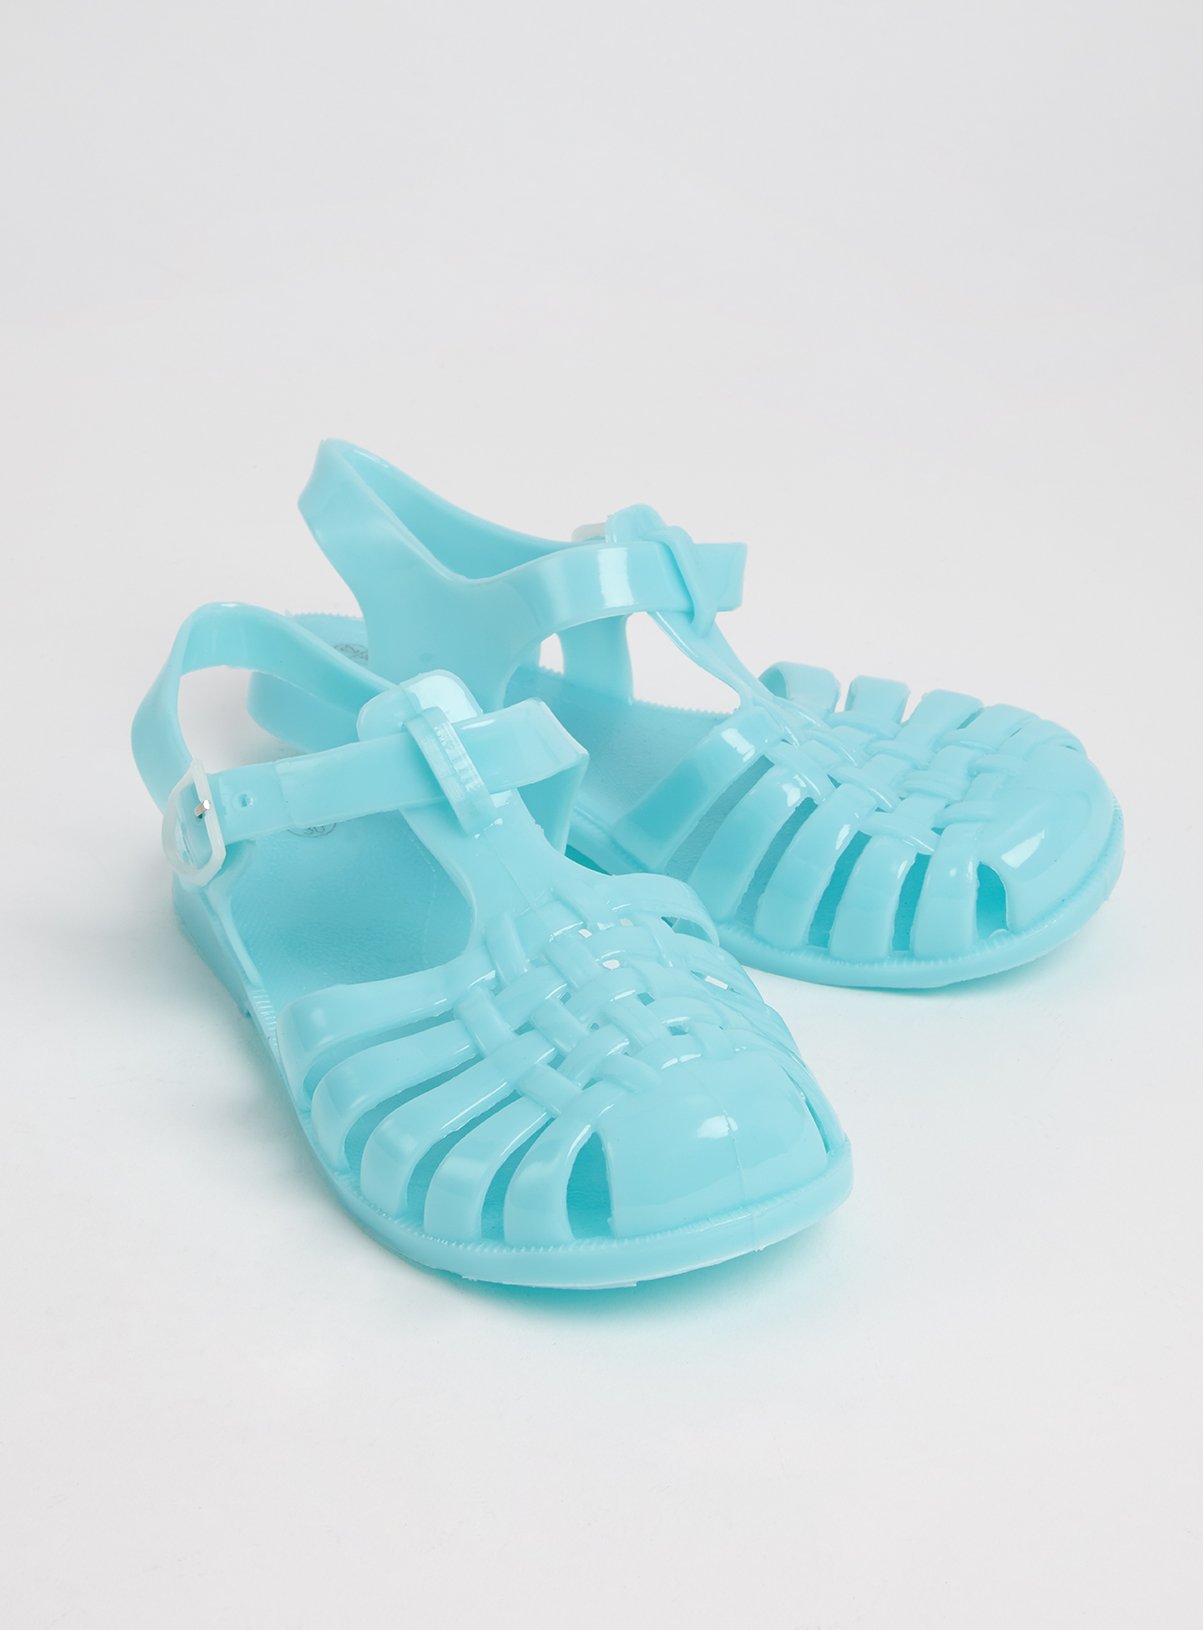 Blue Jelly Sandals Review